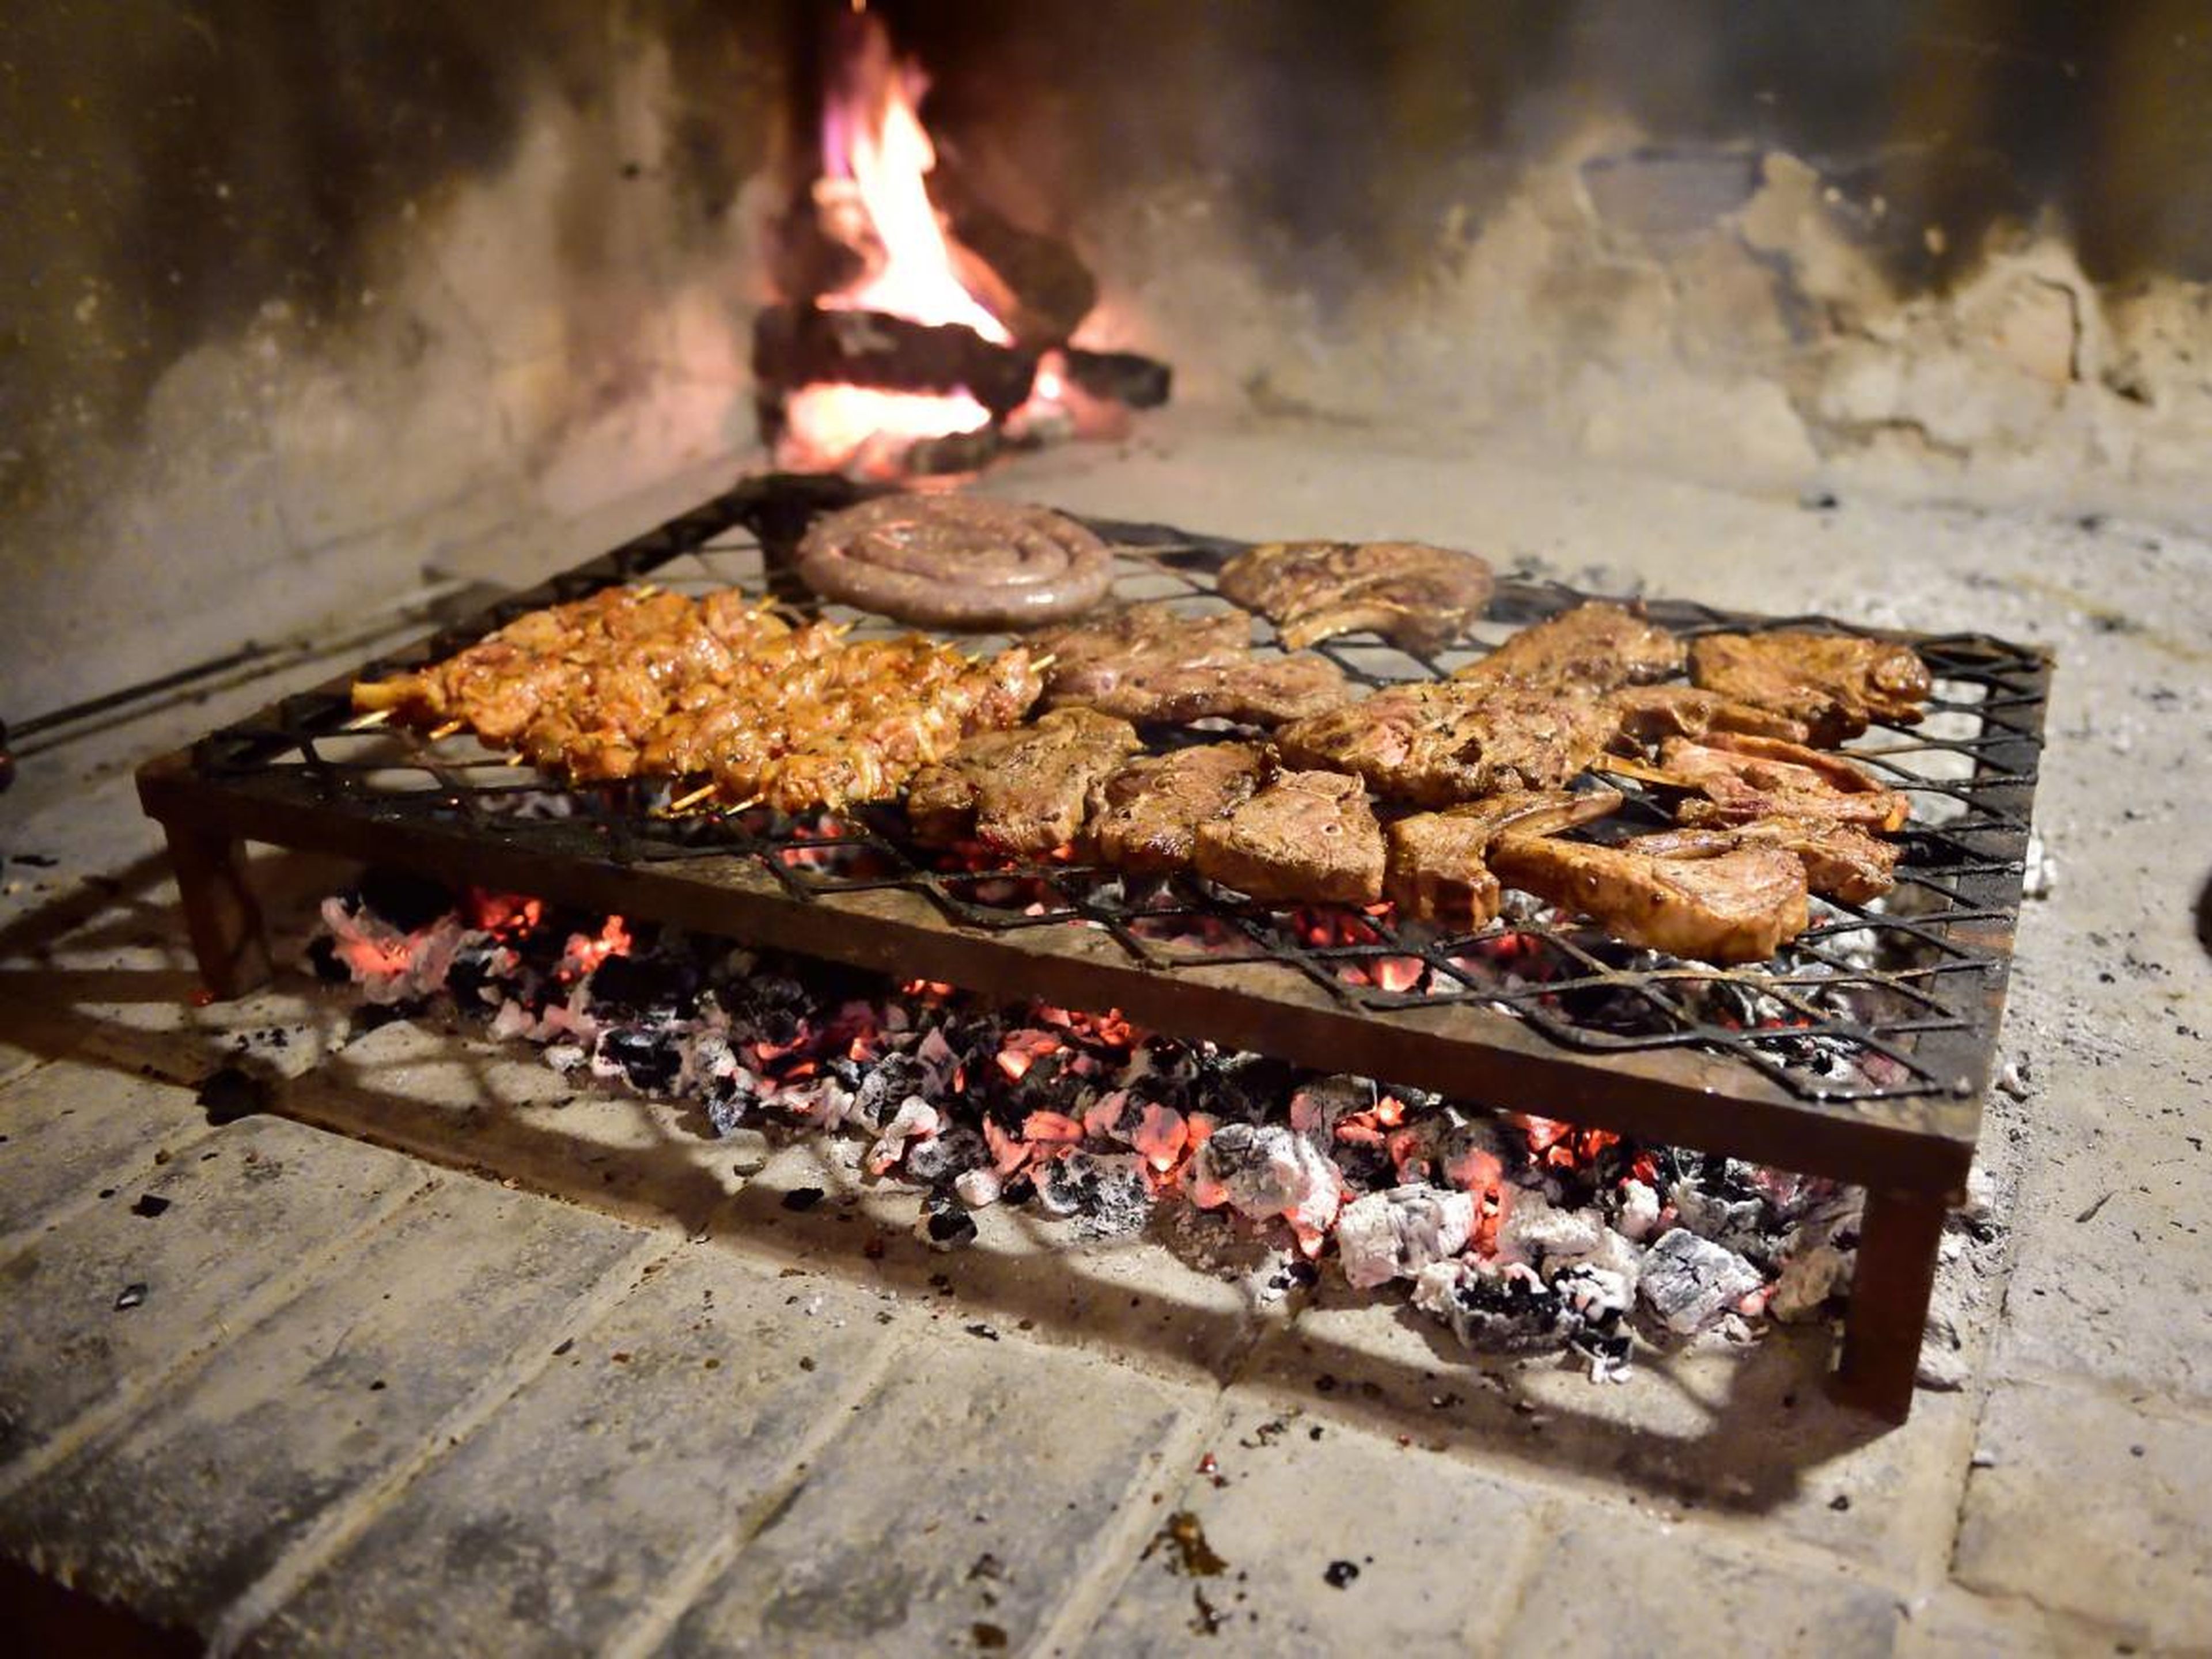 She also suggests visitors "sneak a proper braai experience with locals" during your trip. A braai involves lots of meat being cooked over an open flame.